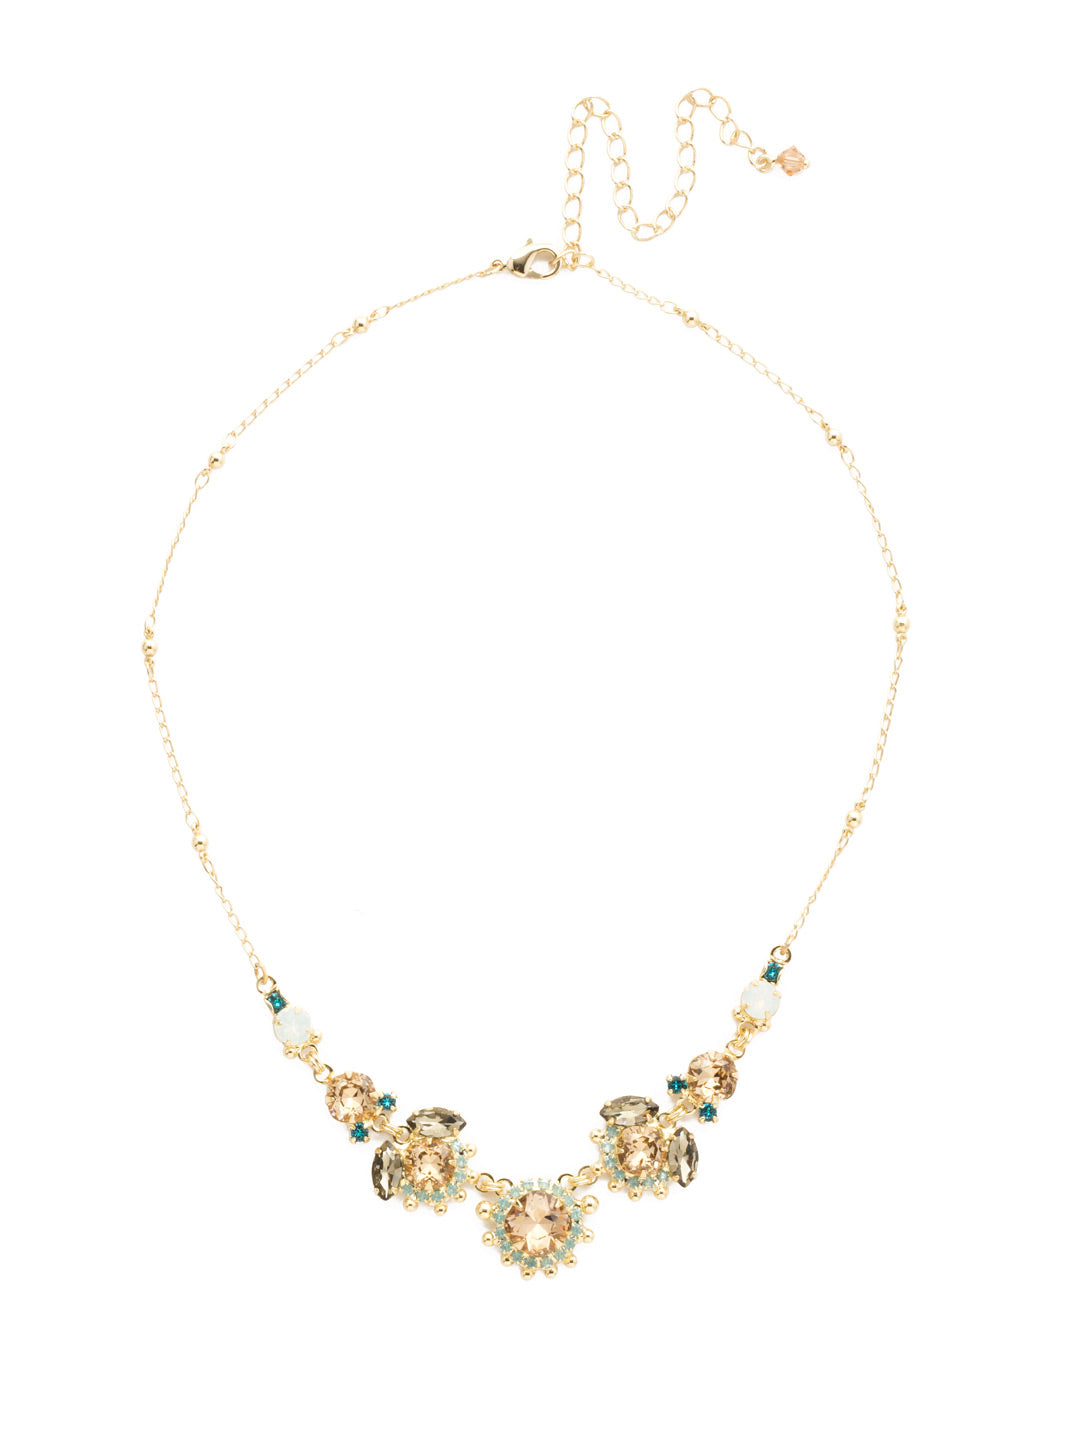 California Poppy Statement Necklace - NDU9BGDW - Elegance abounds with this assortment of round and navette crystal clusters adorned with metal ball details on a decorative chain.